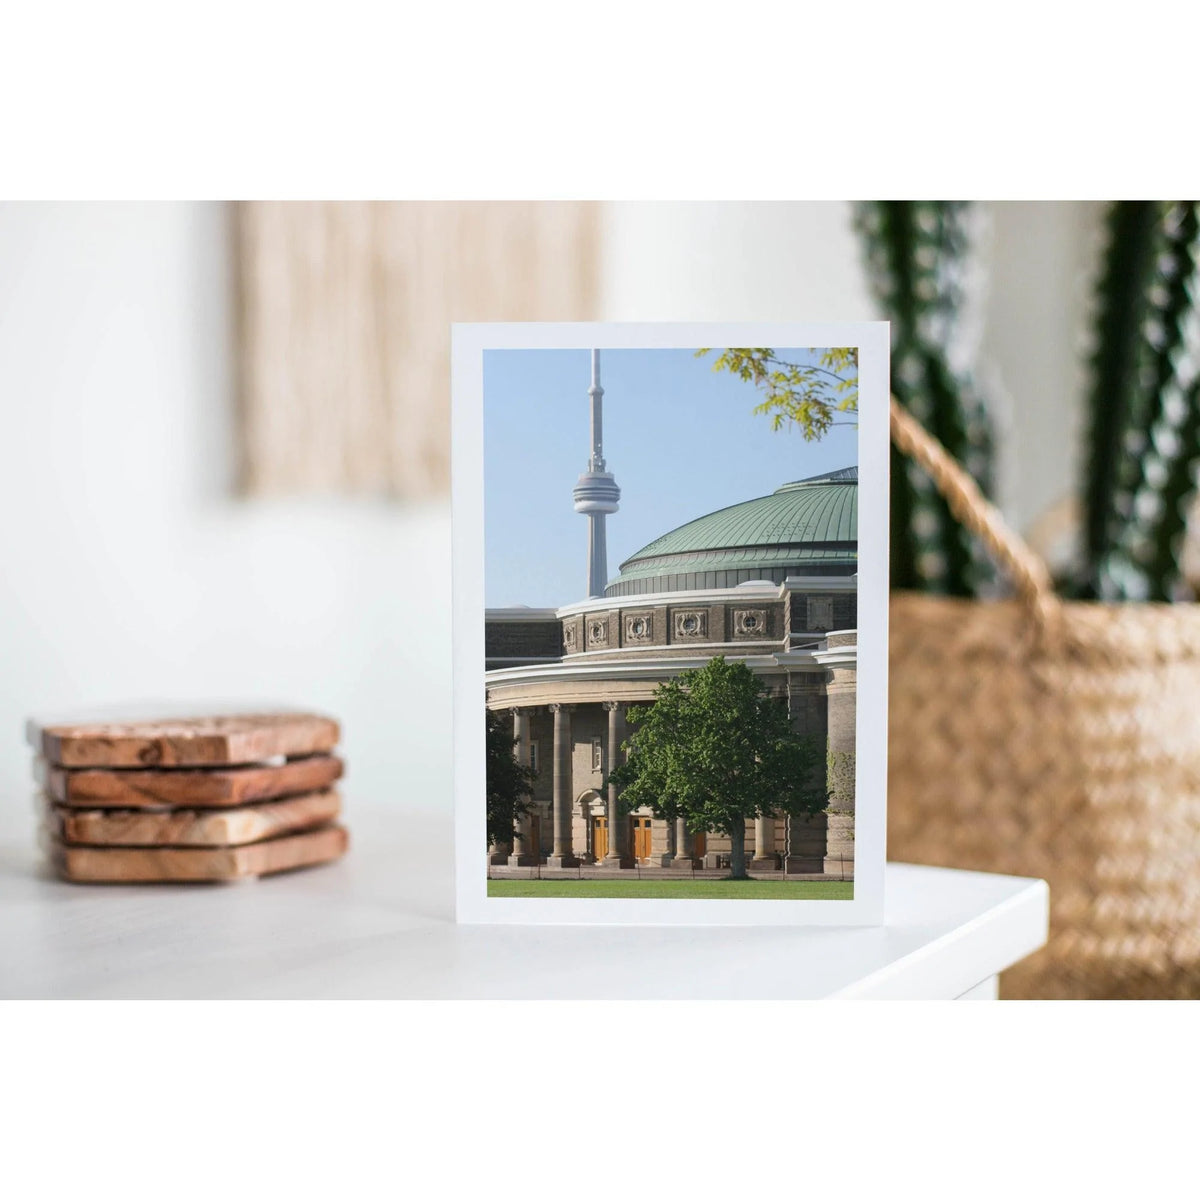 U of T - Aerial View St George Campus 1 Toronto Greeting Card | Totally Toronto Art Inc. 